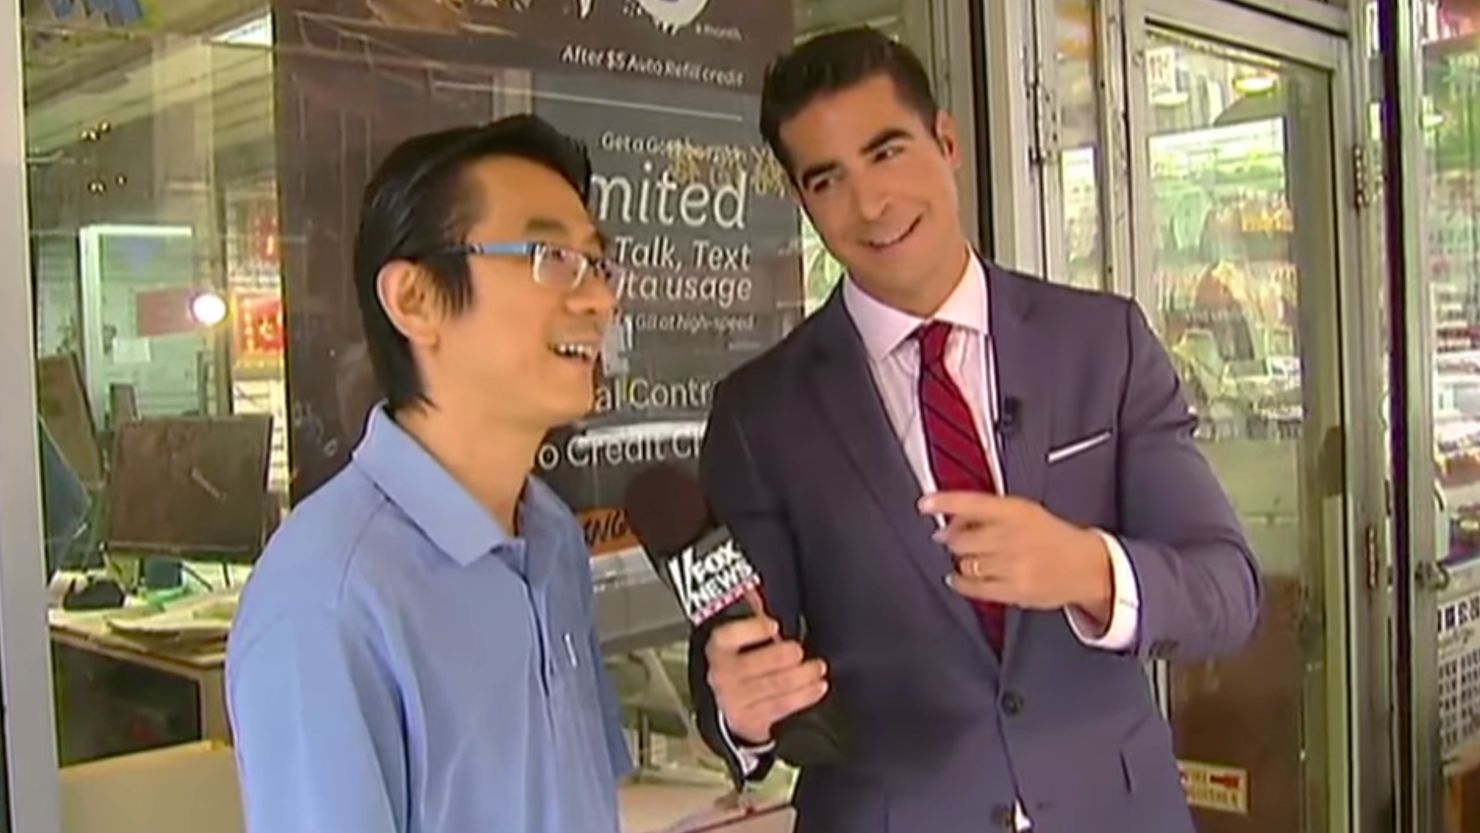 Fox News' Jesse Watters interviews Chinese Americans in a controversial "O'Reilly Factor" segment.